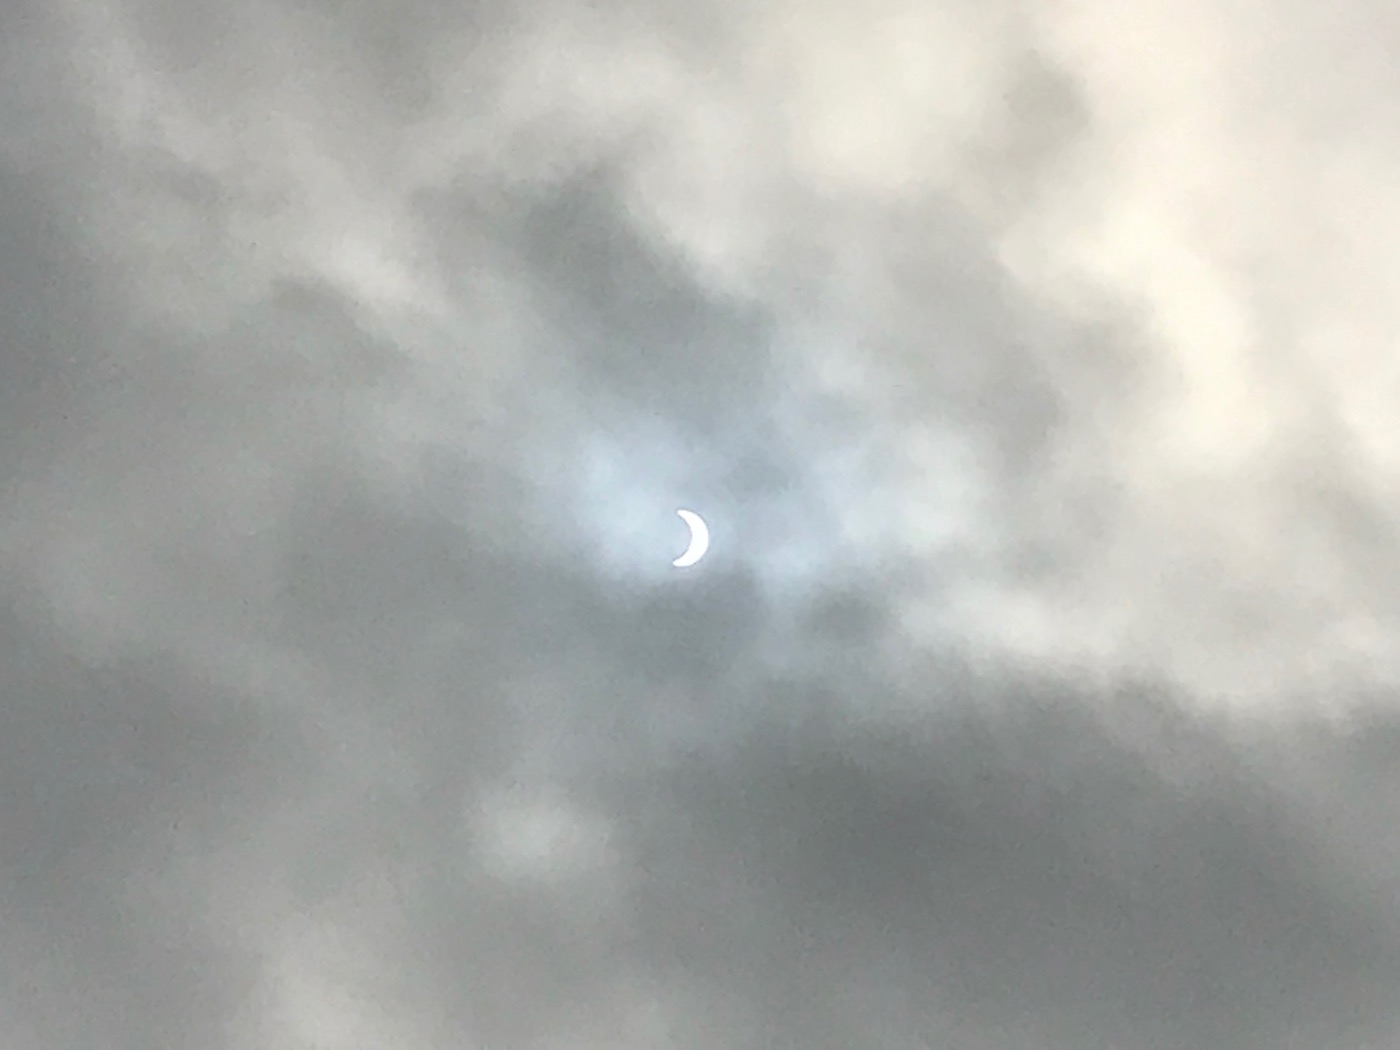 The sun at the peak of the partial eclipse of 2017, as seen through some clouds. Most of the sun is obscured by the moon, leaving a crescent shape.